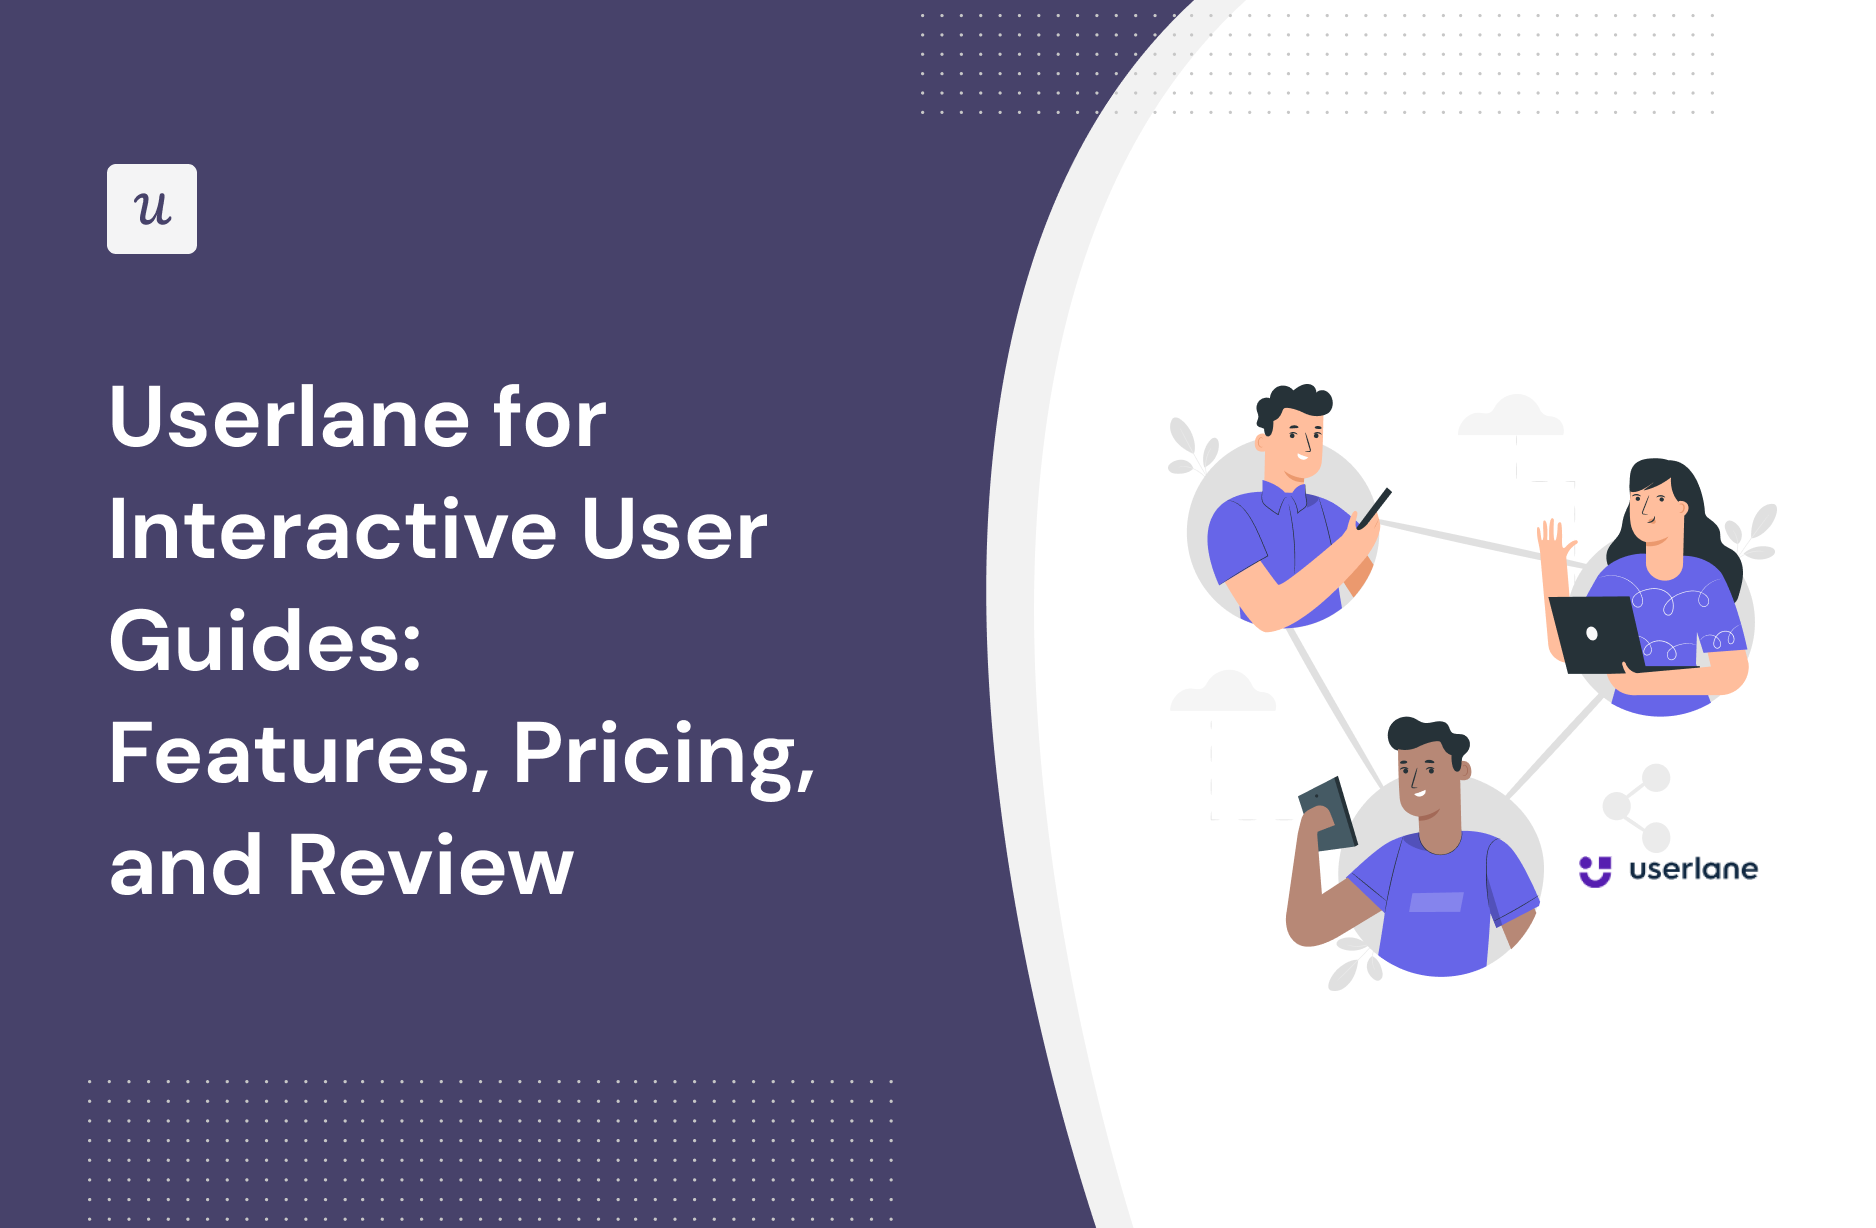 Userlane for Interactive User Guides: Features, Pricing, and Review